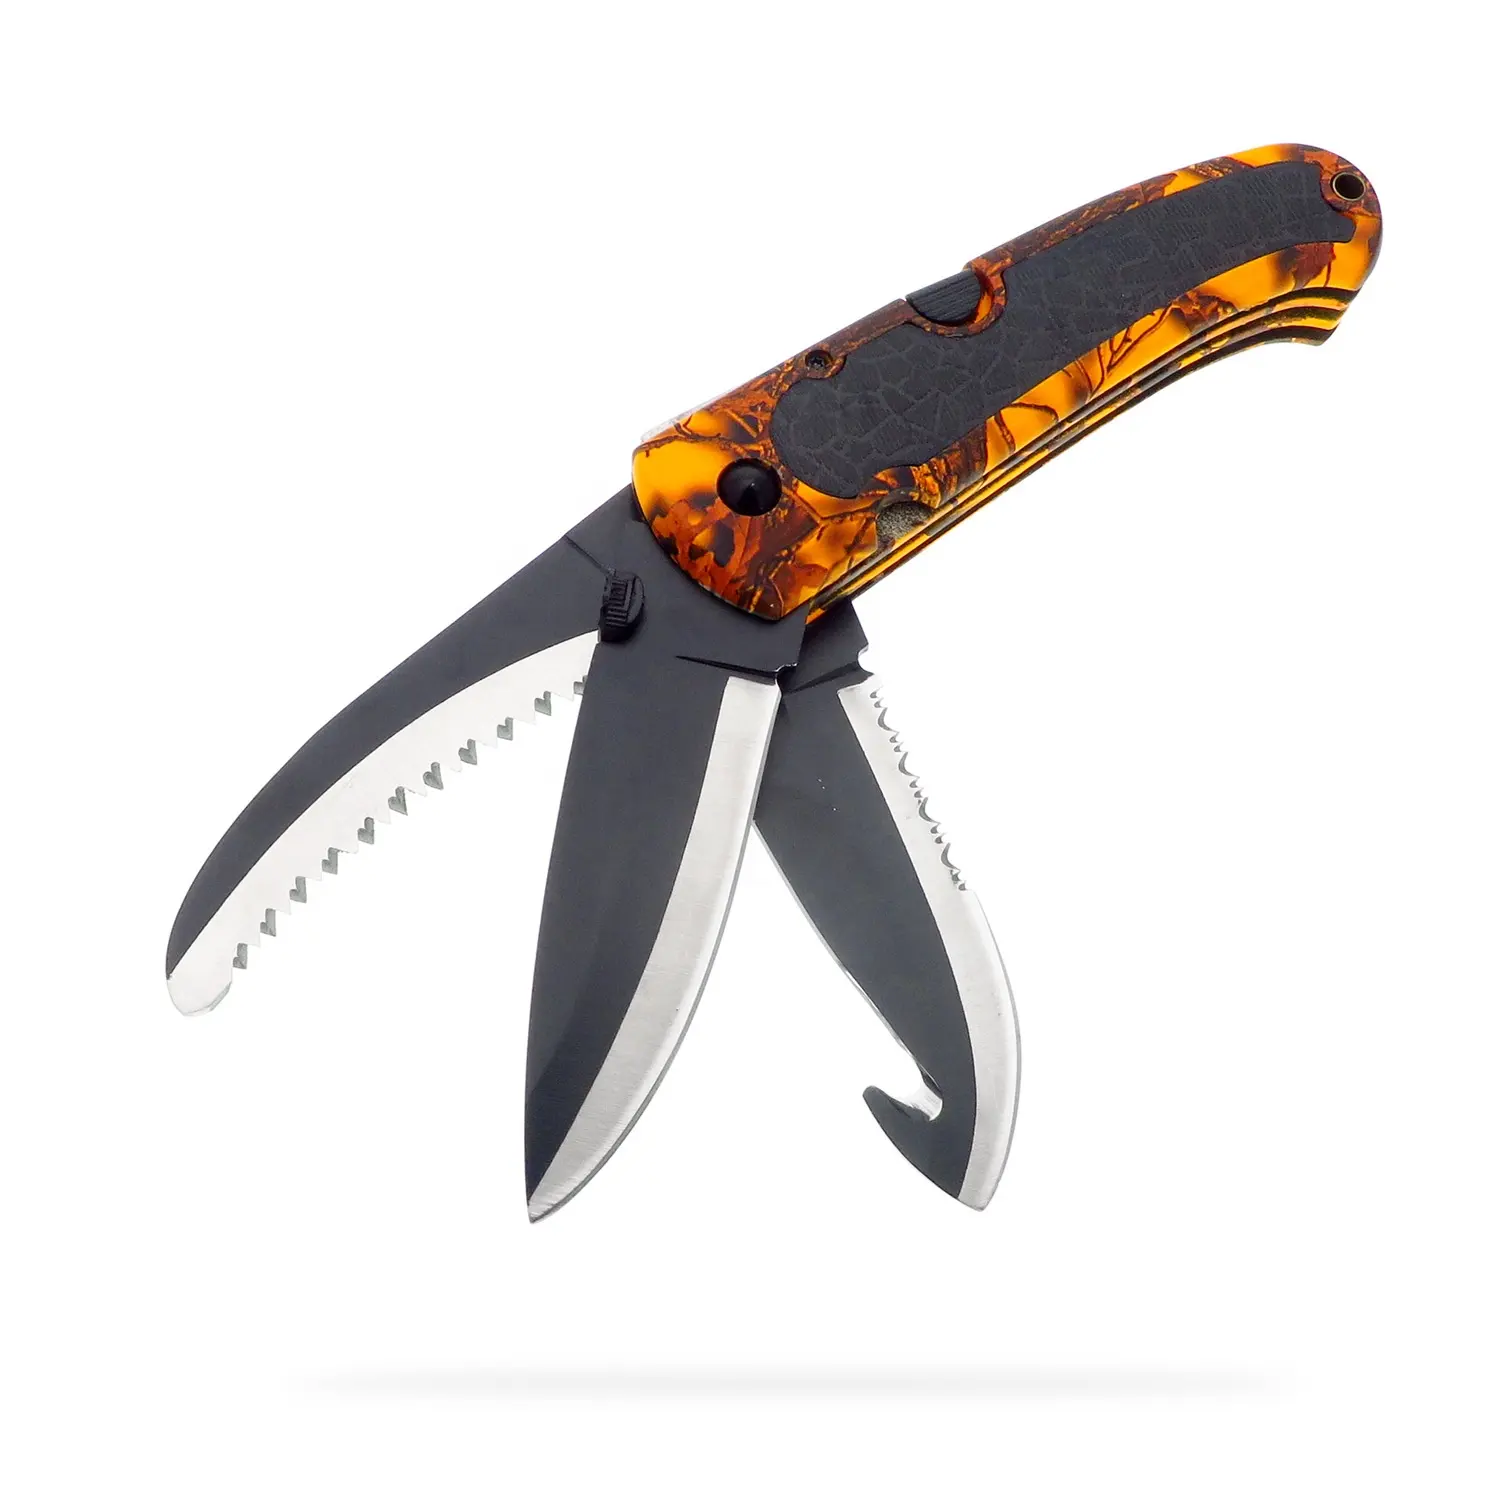 Camo Covered 3Cr13 Stainless Steel Multi-functional Folding Pocket Knife